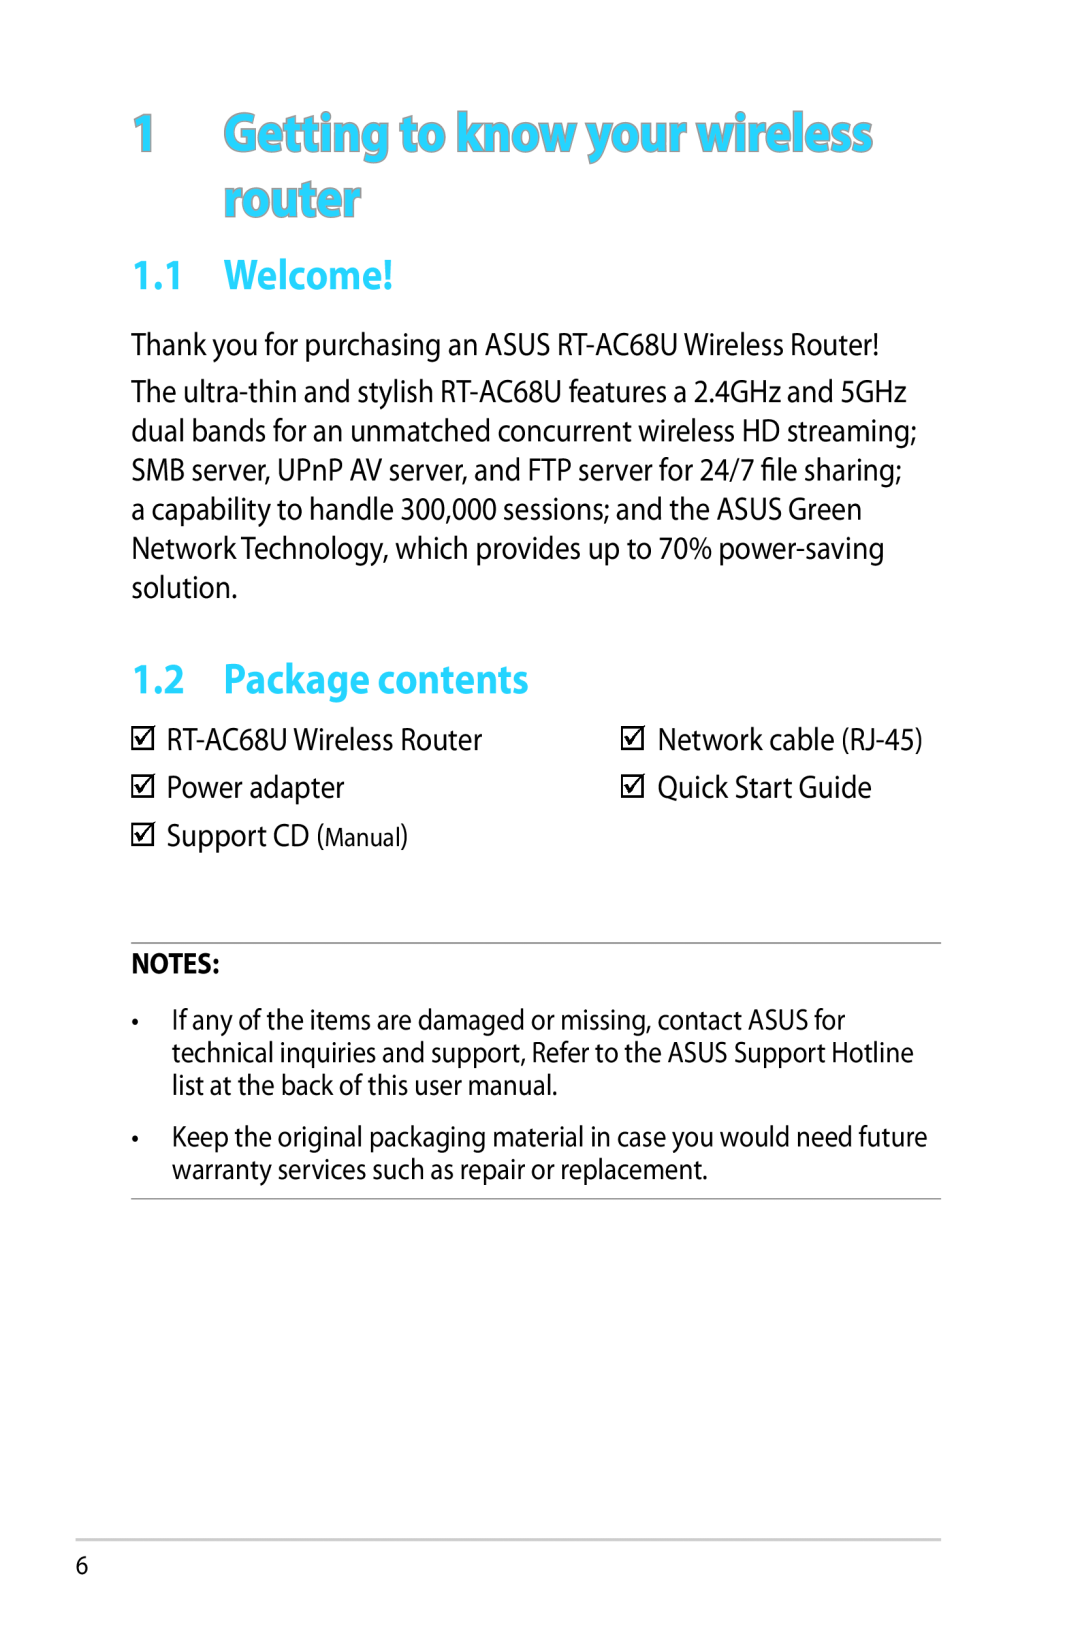 Asus RTAC68U manual Getting to know your wireless router, Welcome, Package contents 